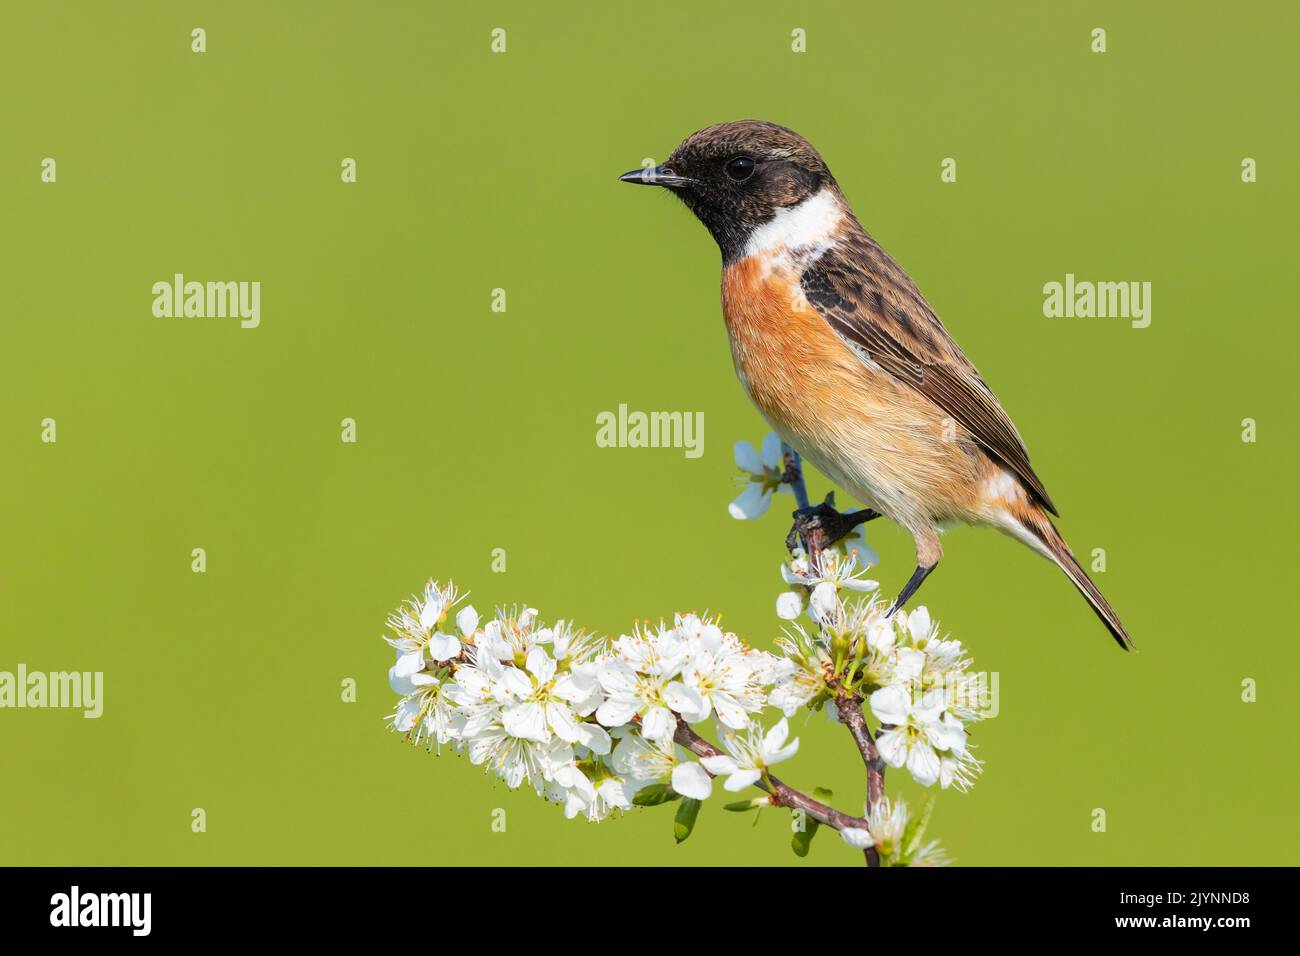 European Stonechat (Saxicola rubicola), side view of an adult male just standing on a Blackthorn branch, Campania, Italy Stock Photo